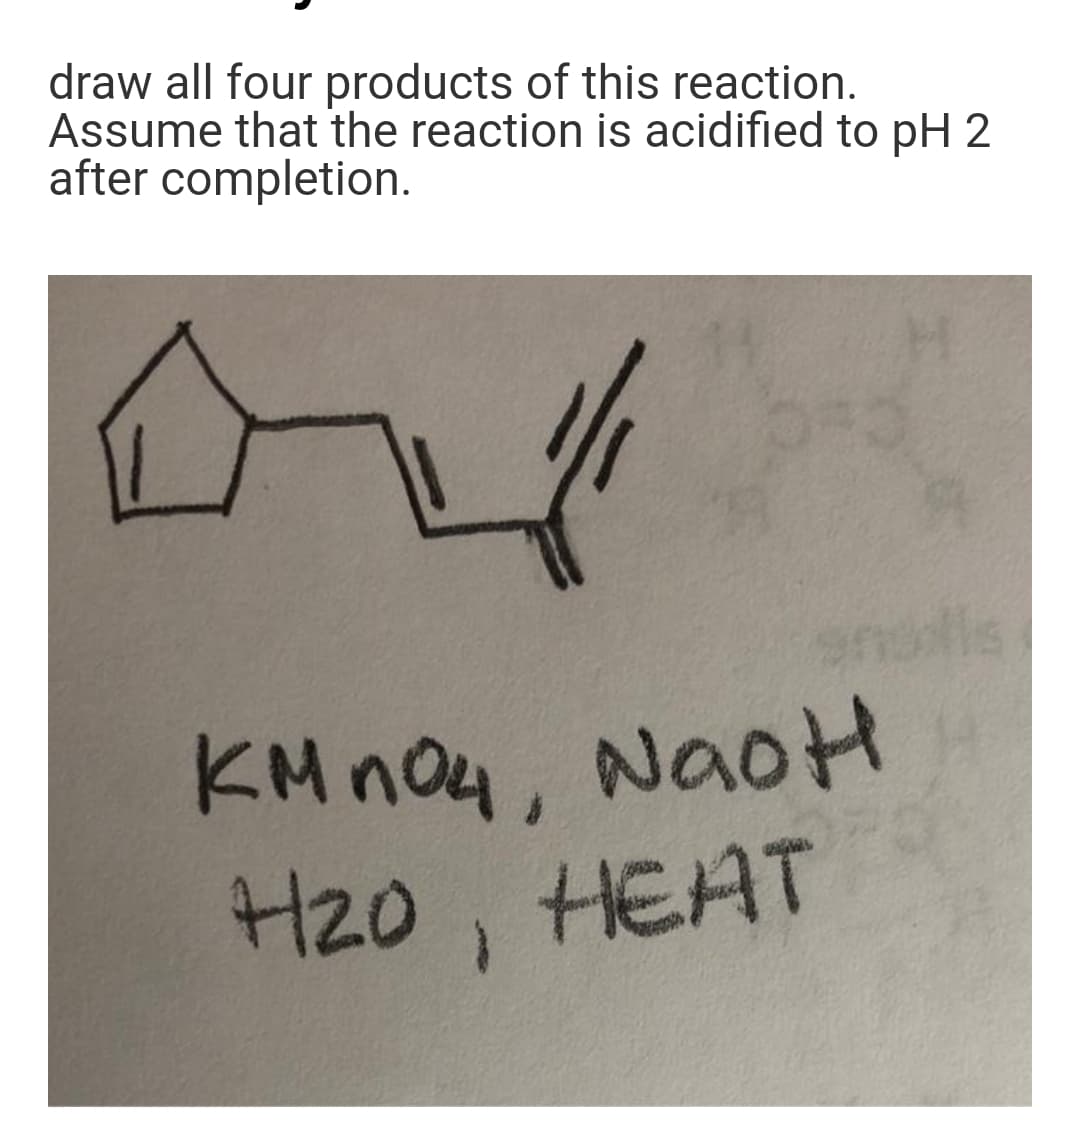 draw all four products of this reaction.
Assume that the reaction is acidified to pH 2
after completion.
nlls
KM no4, NaoH
HEAT
H20,
